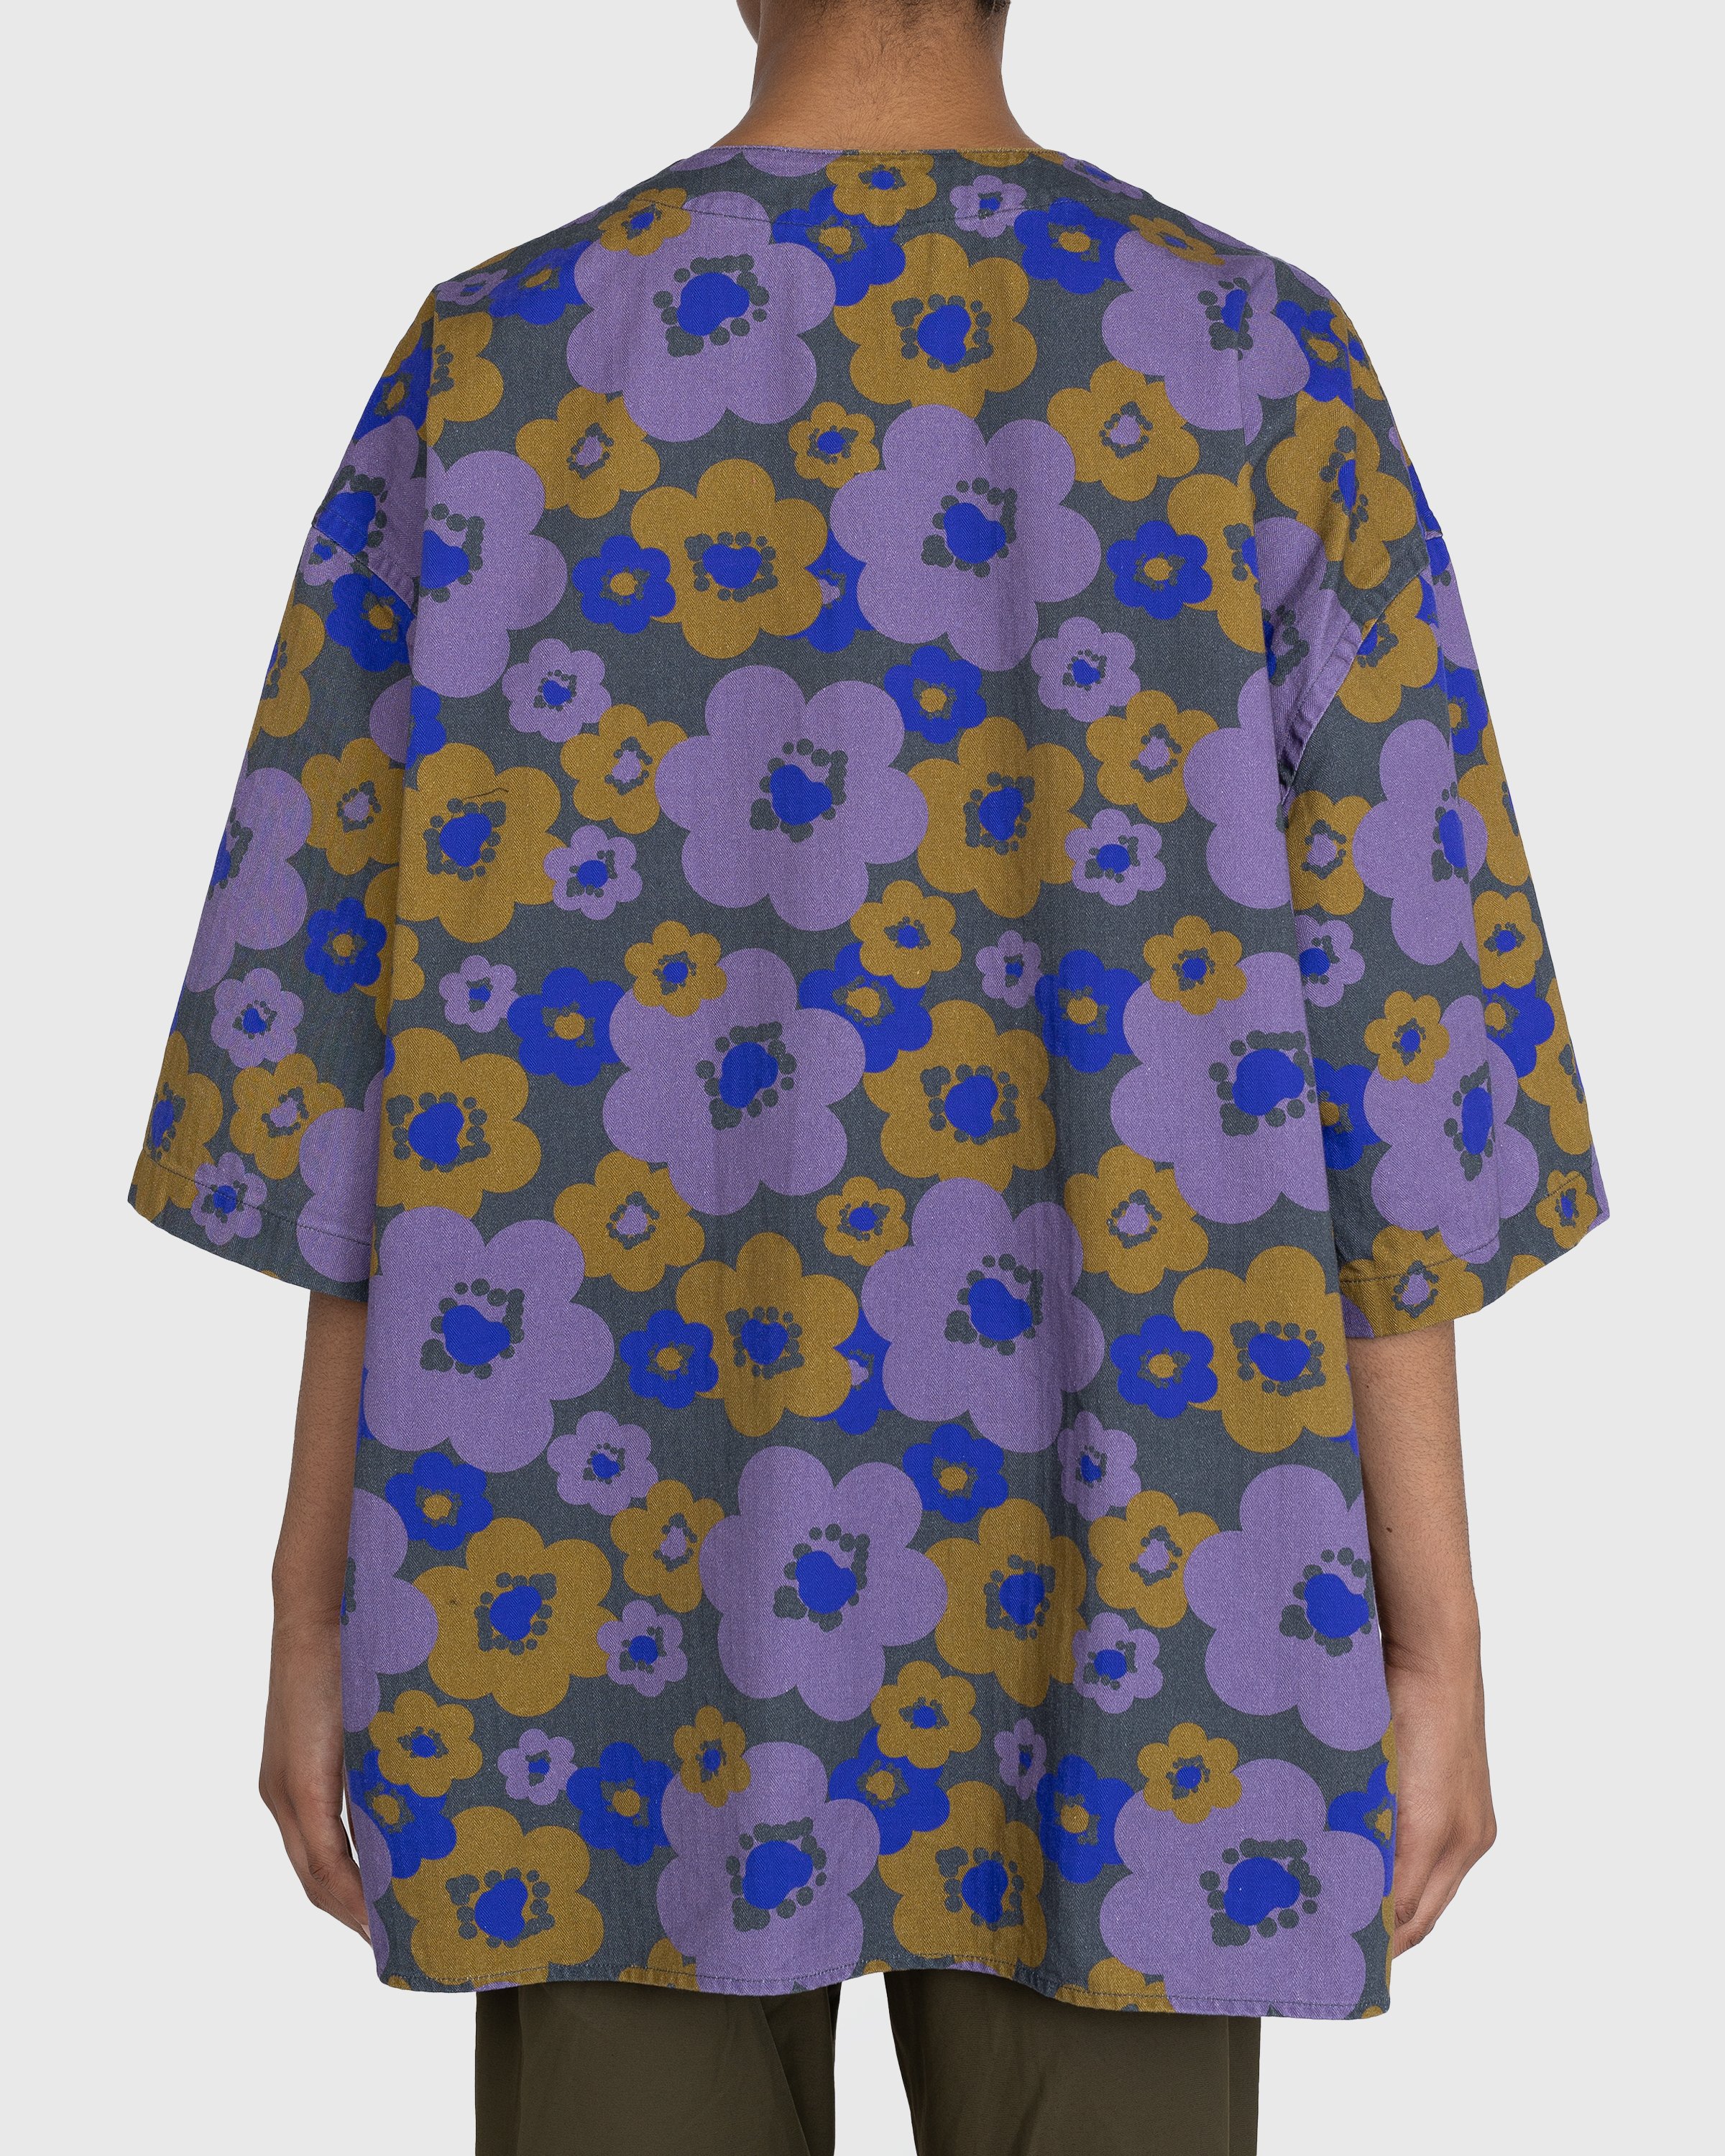 Acne Studios - Floral Short-Sleeve Button-Up Purple/Brown - Clothing - Multi - Image 4